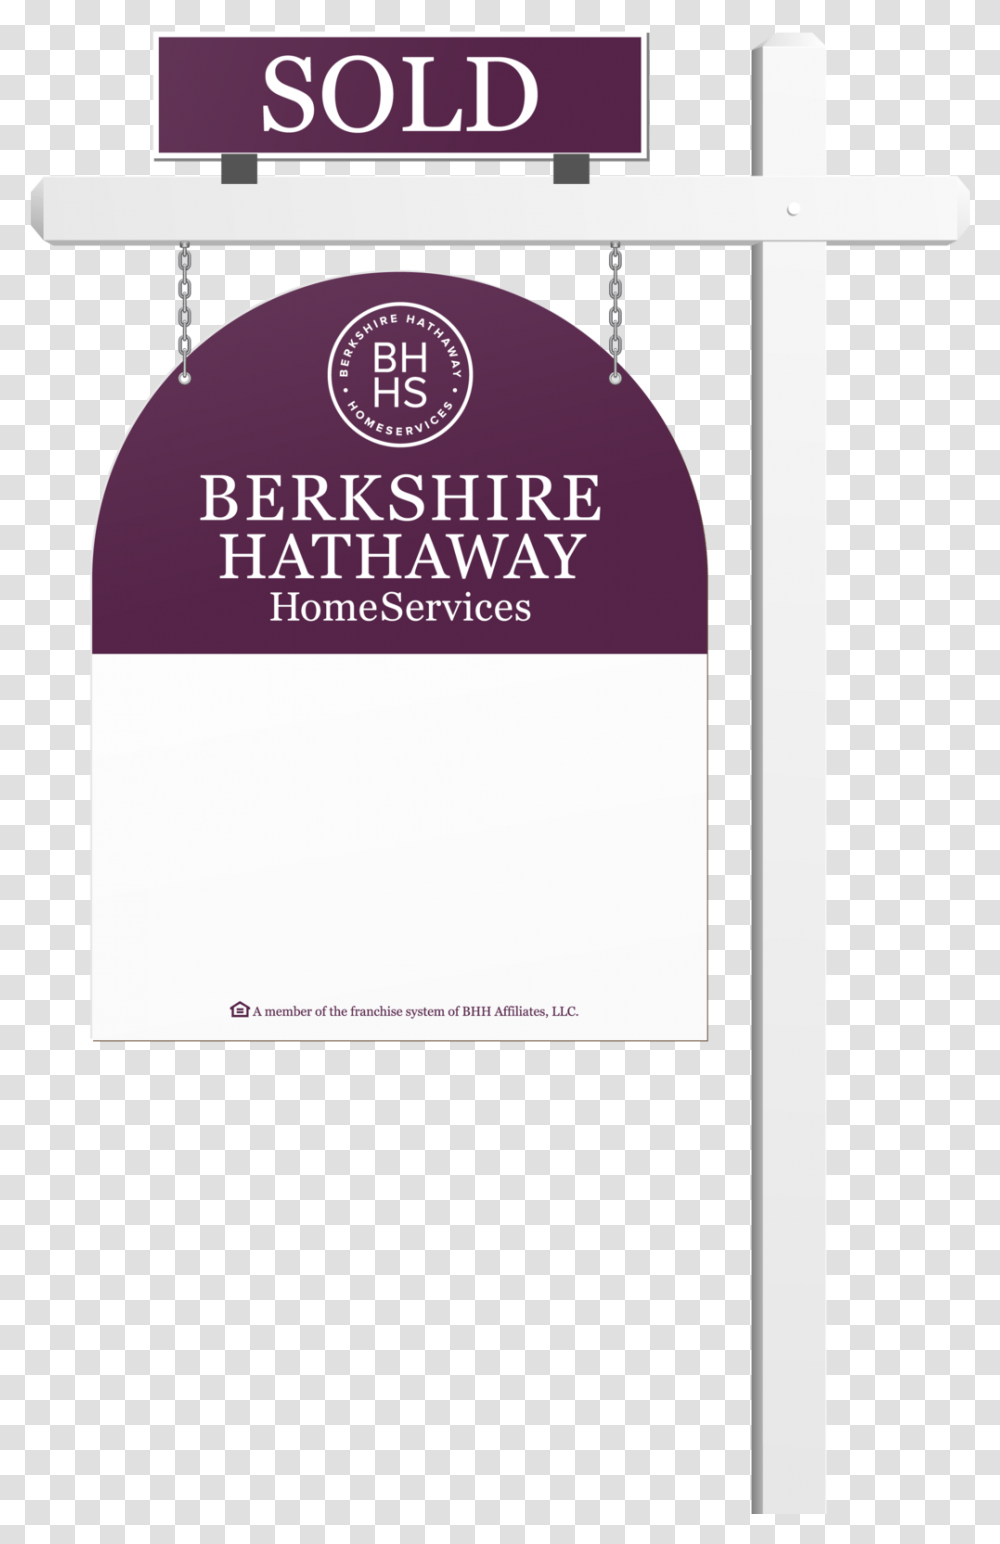 Berkshire Hathaway Homeservices Yard Sign, Wine, Alcohol, Beverage, Drink Transparent Png